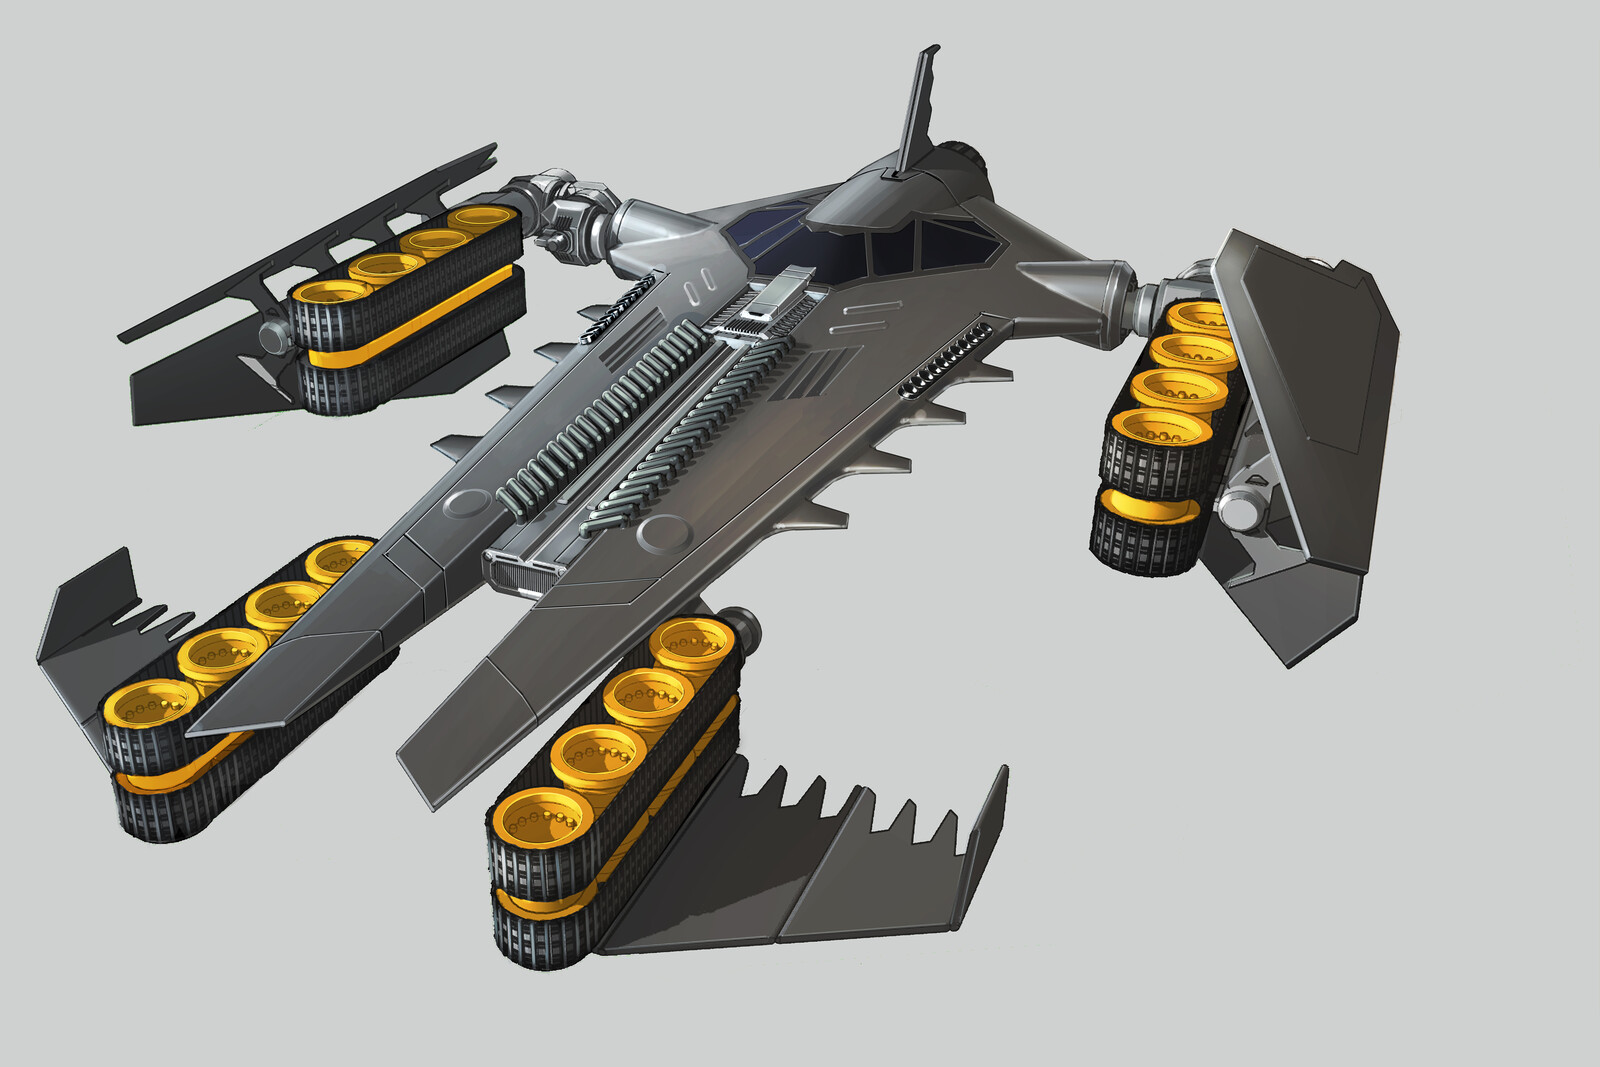 Batwing to Bat Tank transformation toy design: I had to design the batwing to physically transform into the Bat Tank utilizing tiny servos.